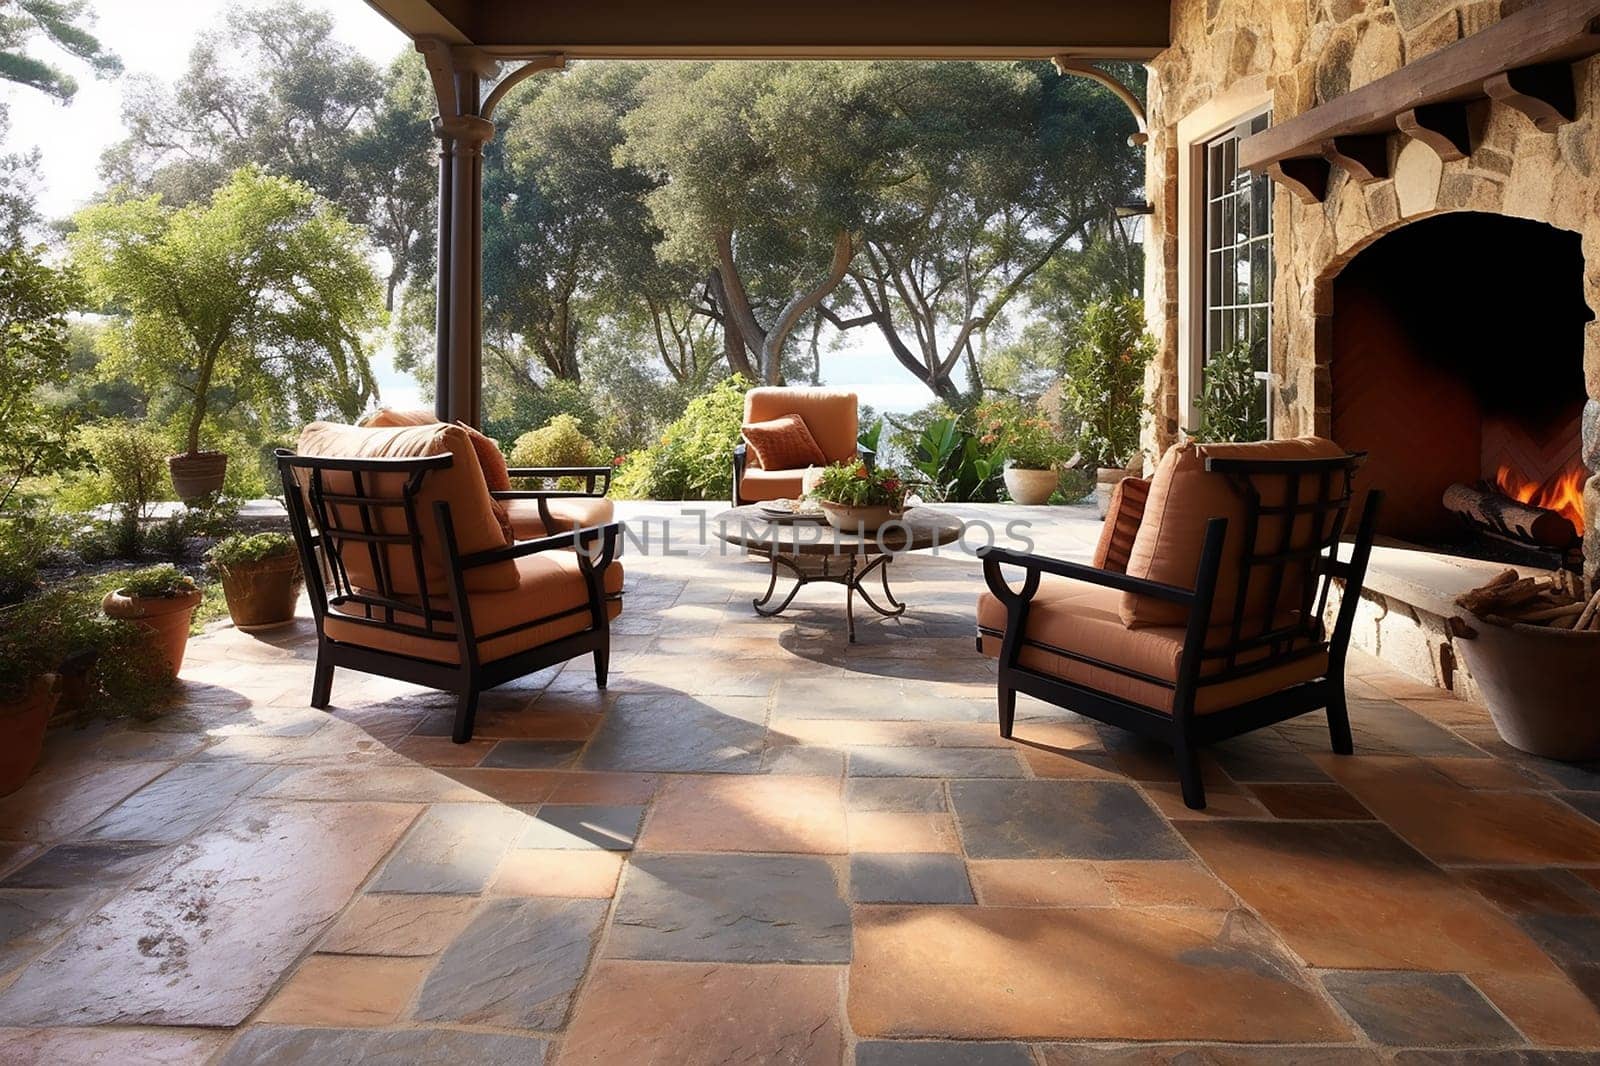 Cozy patio with fireplace, comfortable chairs, and nature view.